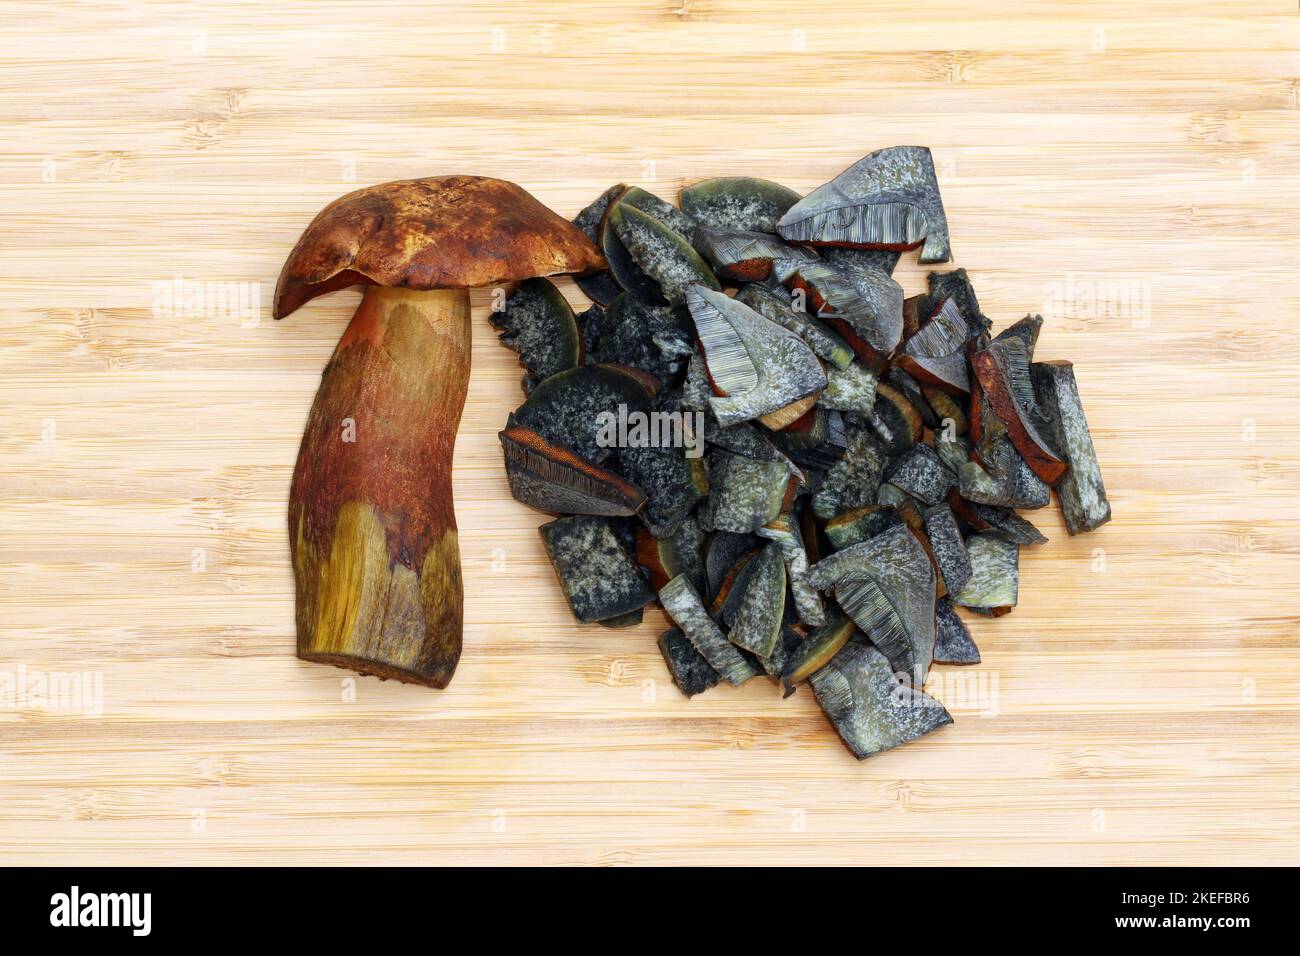 Half and sliced into pieces edible mushroom Neoboletus luridiformis, commonly known as scarletina bolete. All parts of the mushroom turn blue when cut. Stock Photo